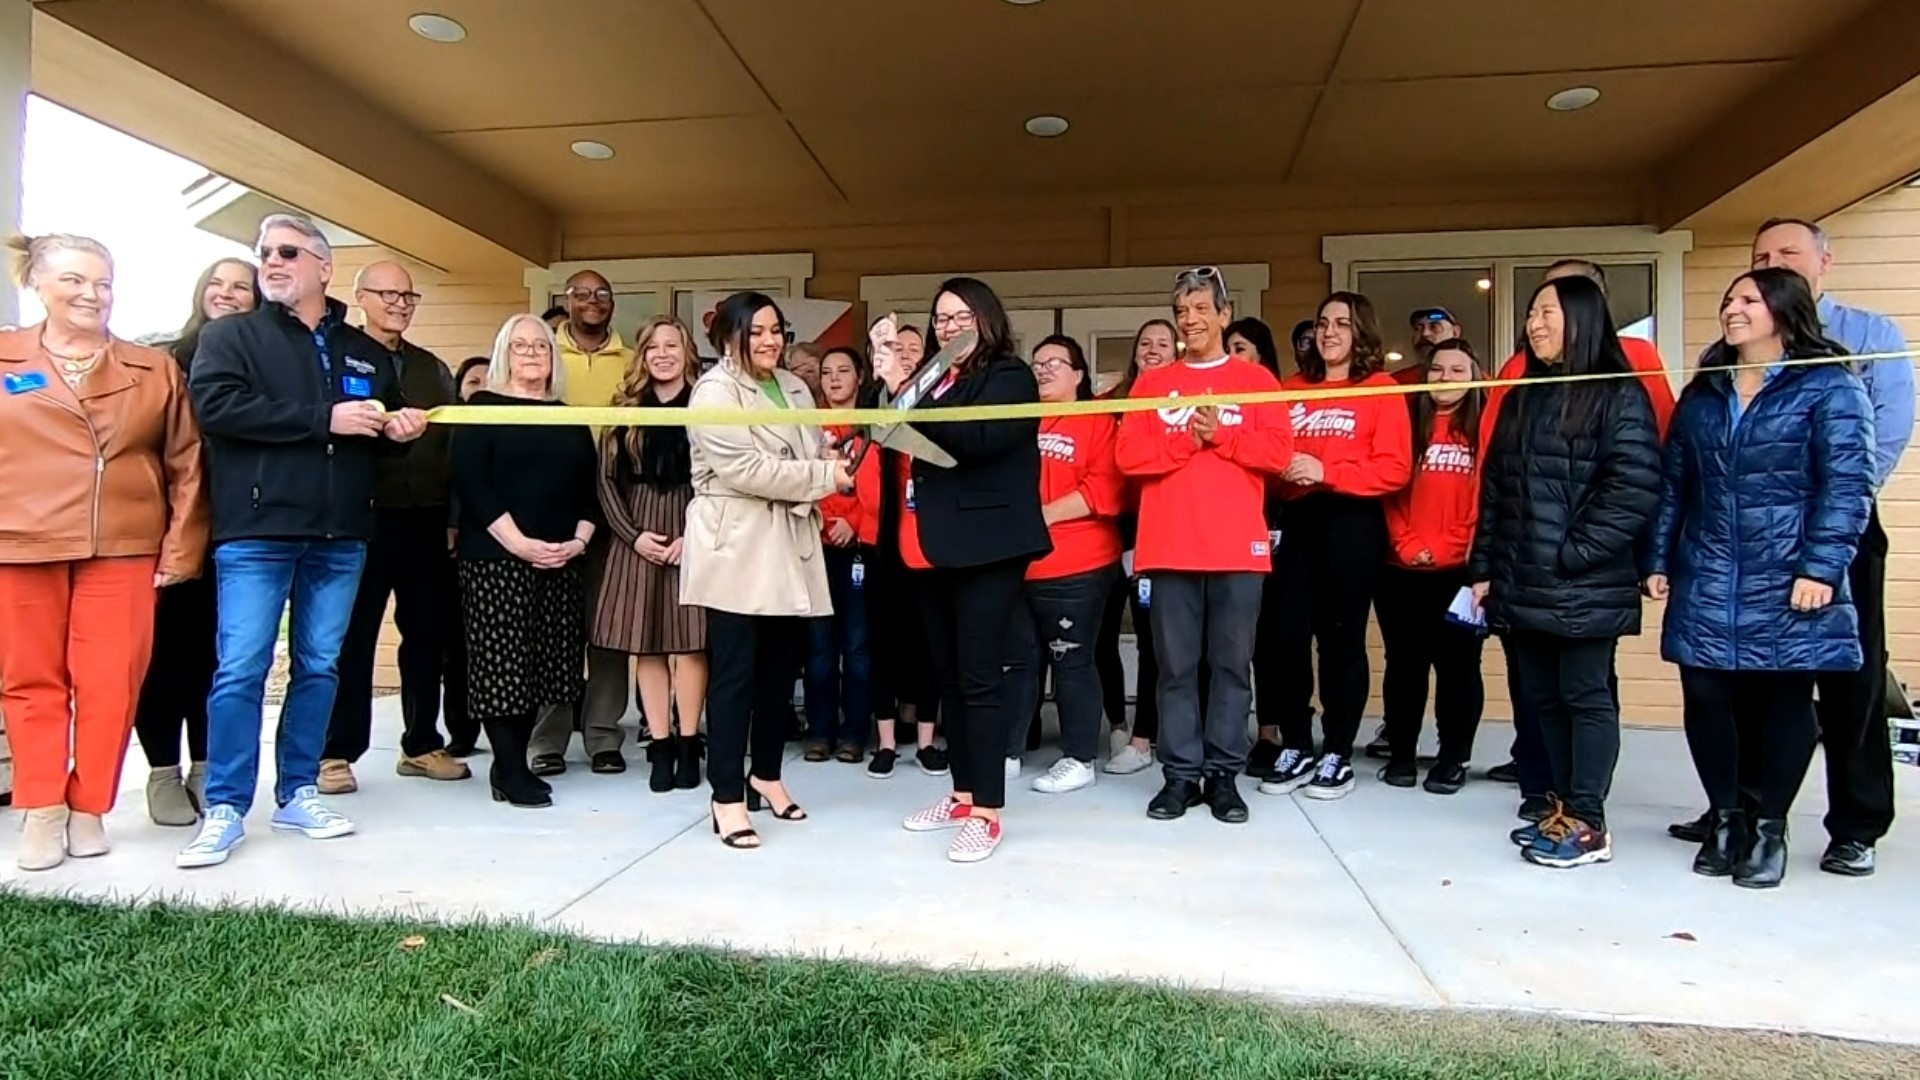 Of the 28 units at Celebration Acres, 25 are affordable housing units, helping to make affordable living a reality for members of the community.